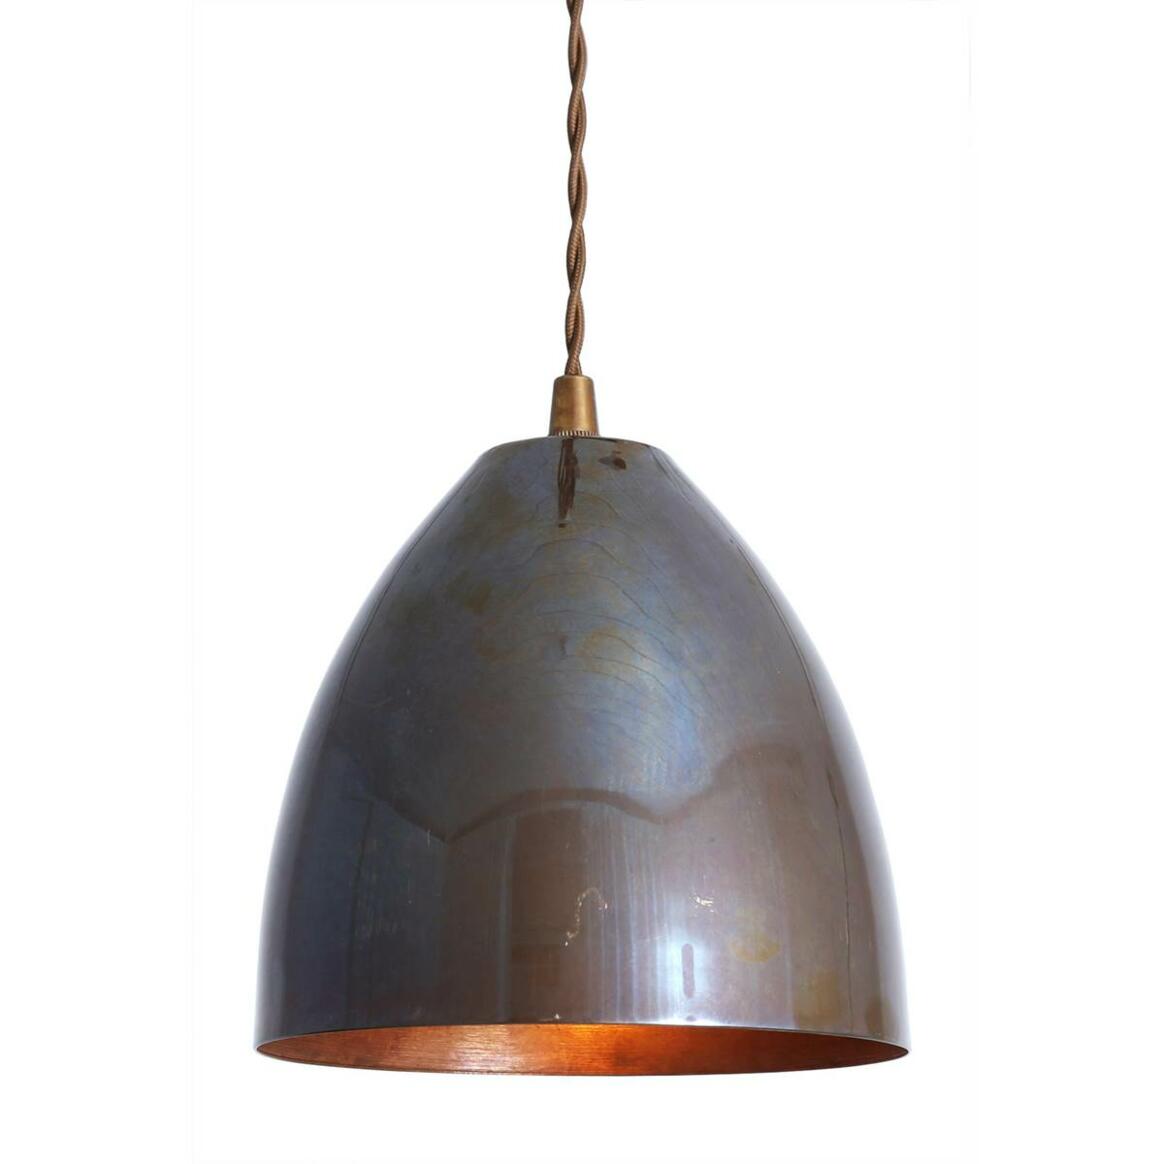 Skyler Small Industrial Cone Pendant Light 6.3" main product image